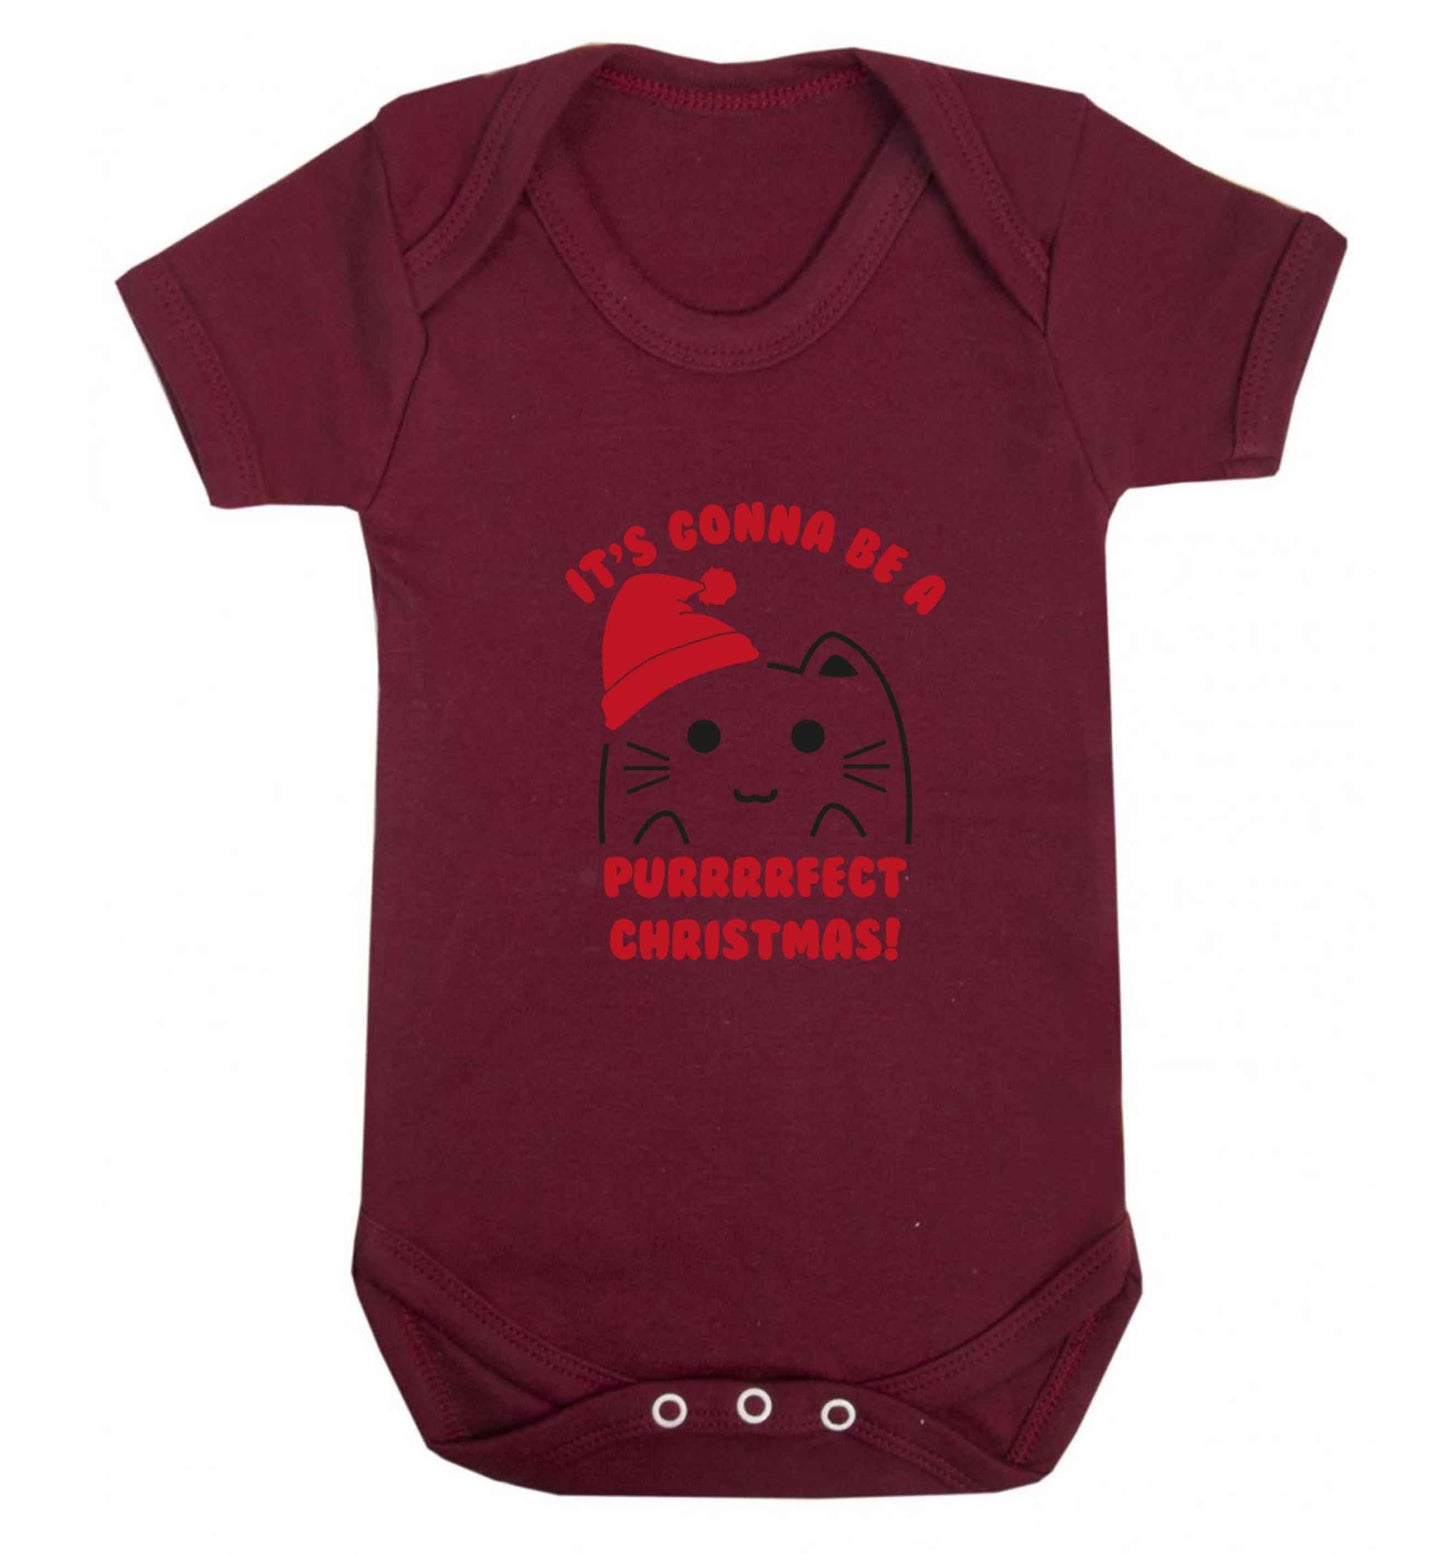 It's going to be a purrfect Christmas baby vest maroon 18-24 months